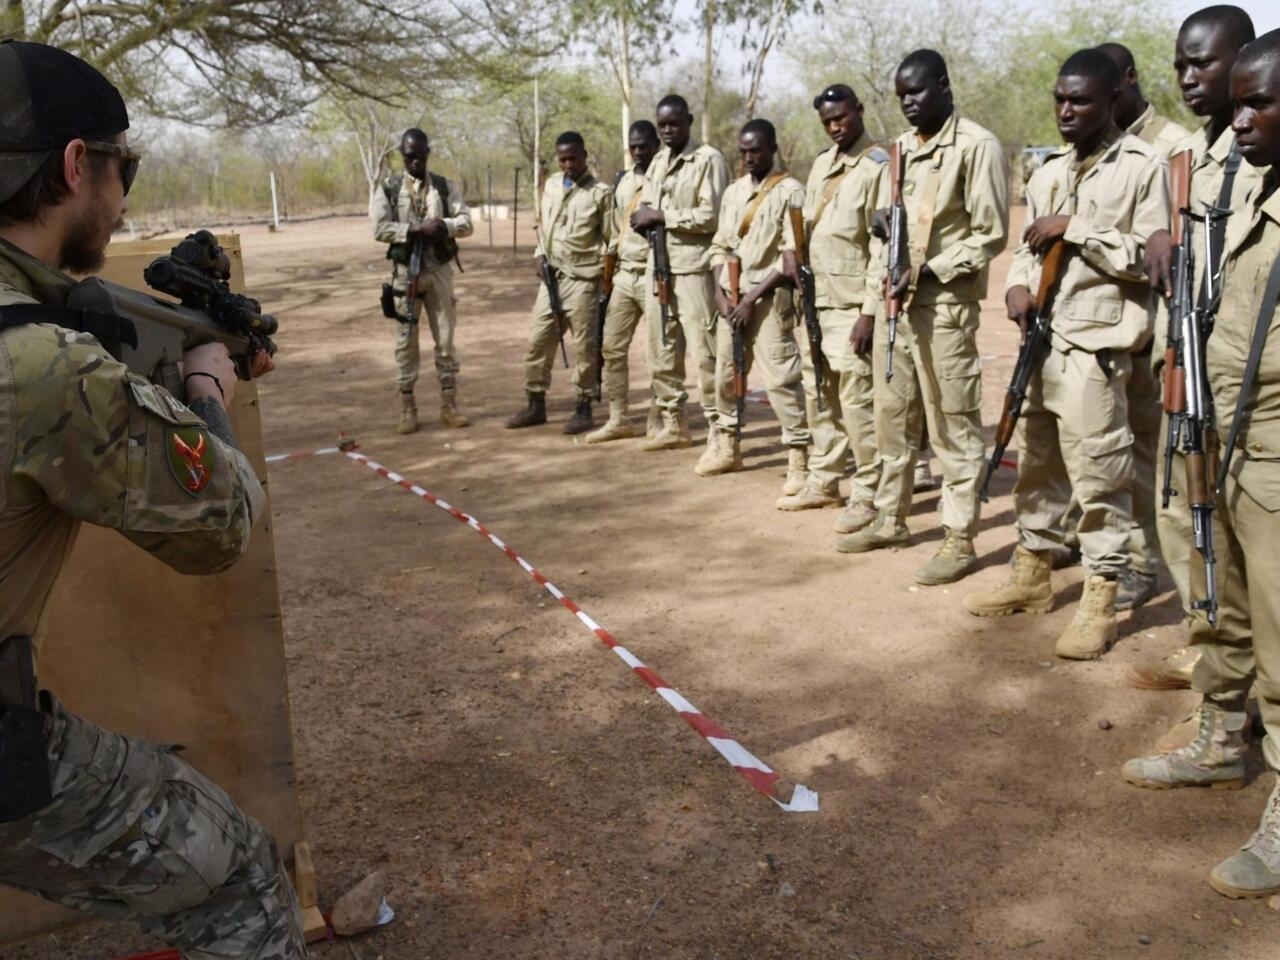 An Austrian army instructor works with Burkina Faso soldiers during training on April 13, 2018 at the KamboinsÈ general Bila Zagre militairy camp near Ouagadougo in Burkina Faso during a military anti-terrorism exercise